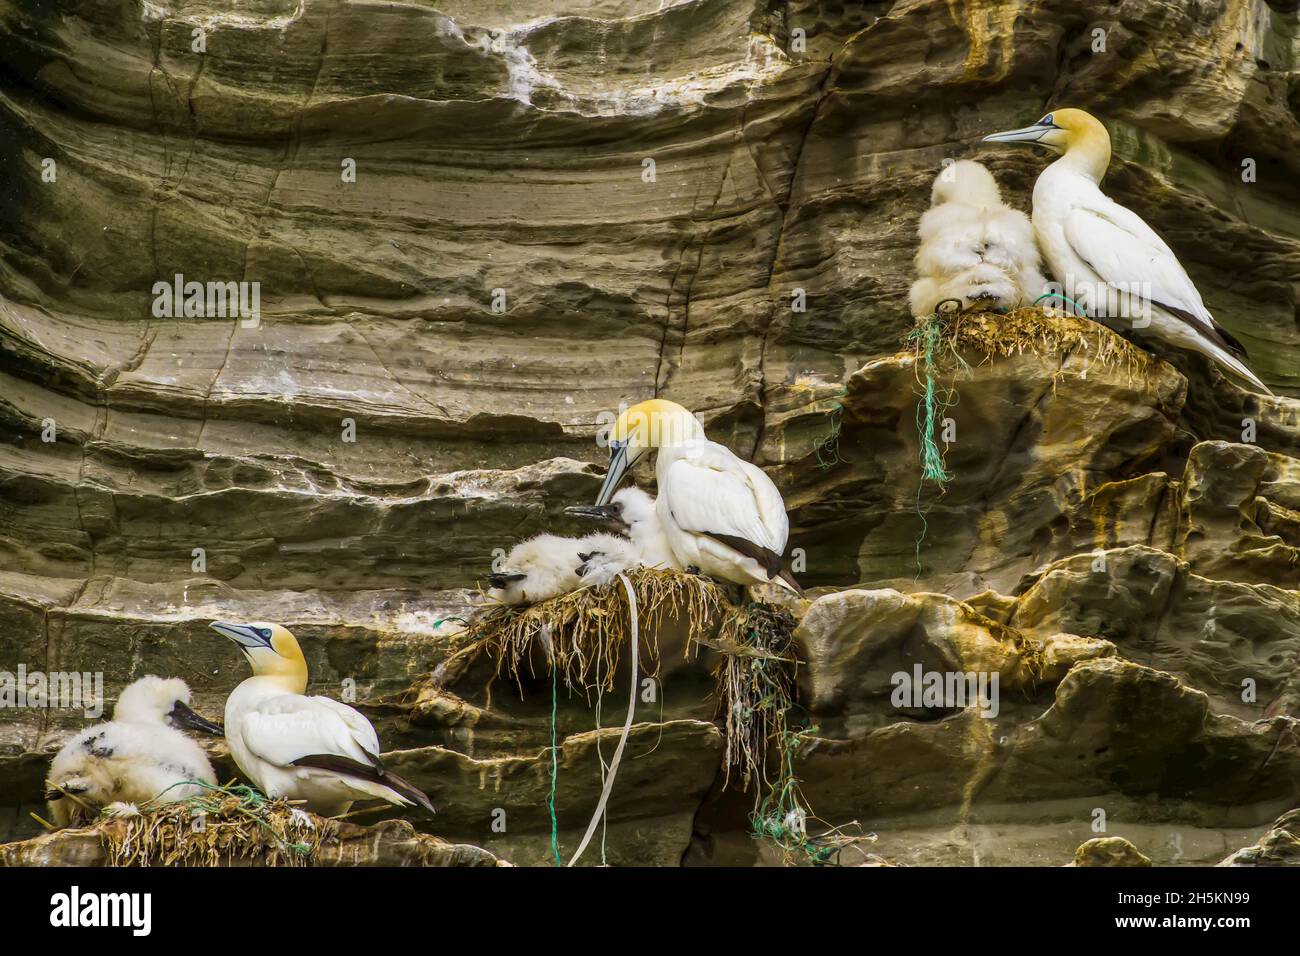 A colony of northern gannets perch in nests on a cliffside. Stock Photo